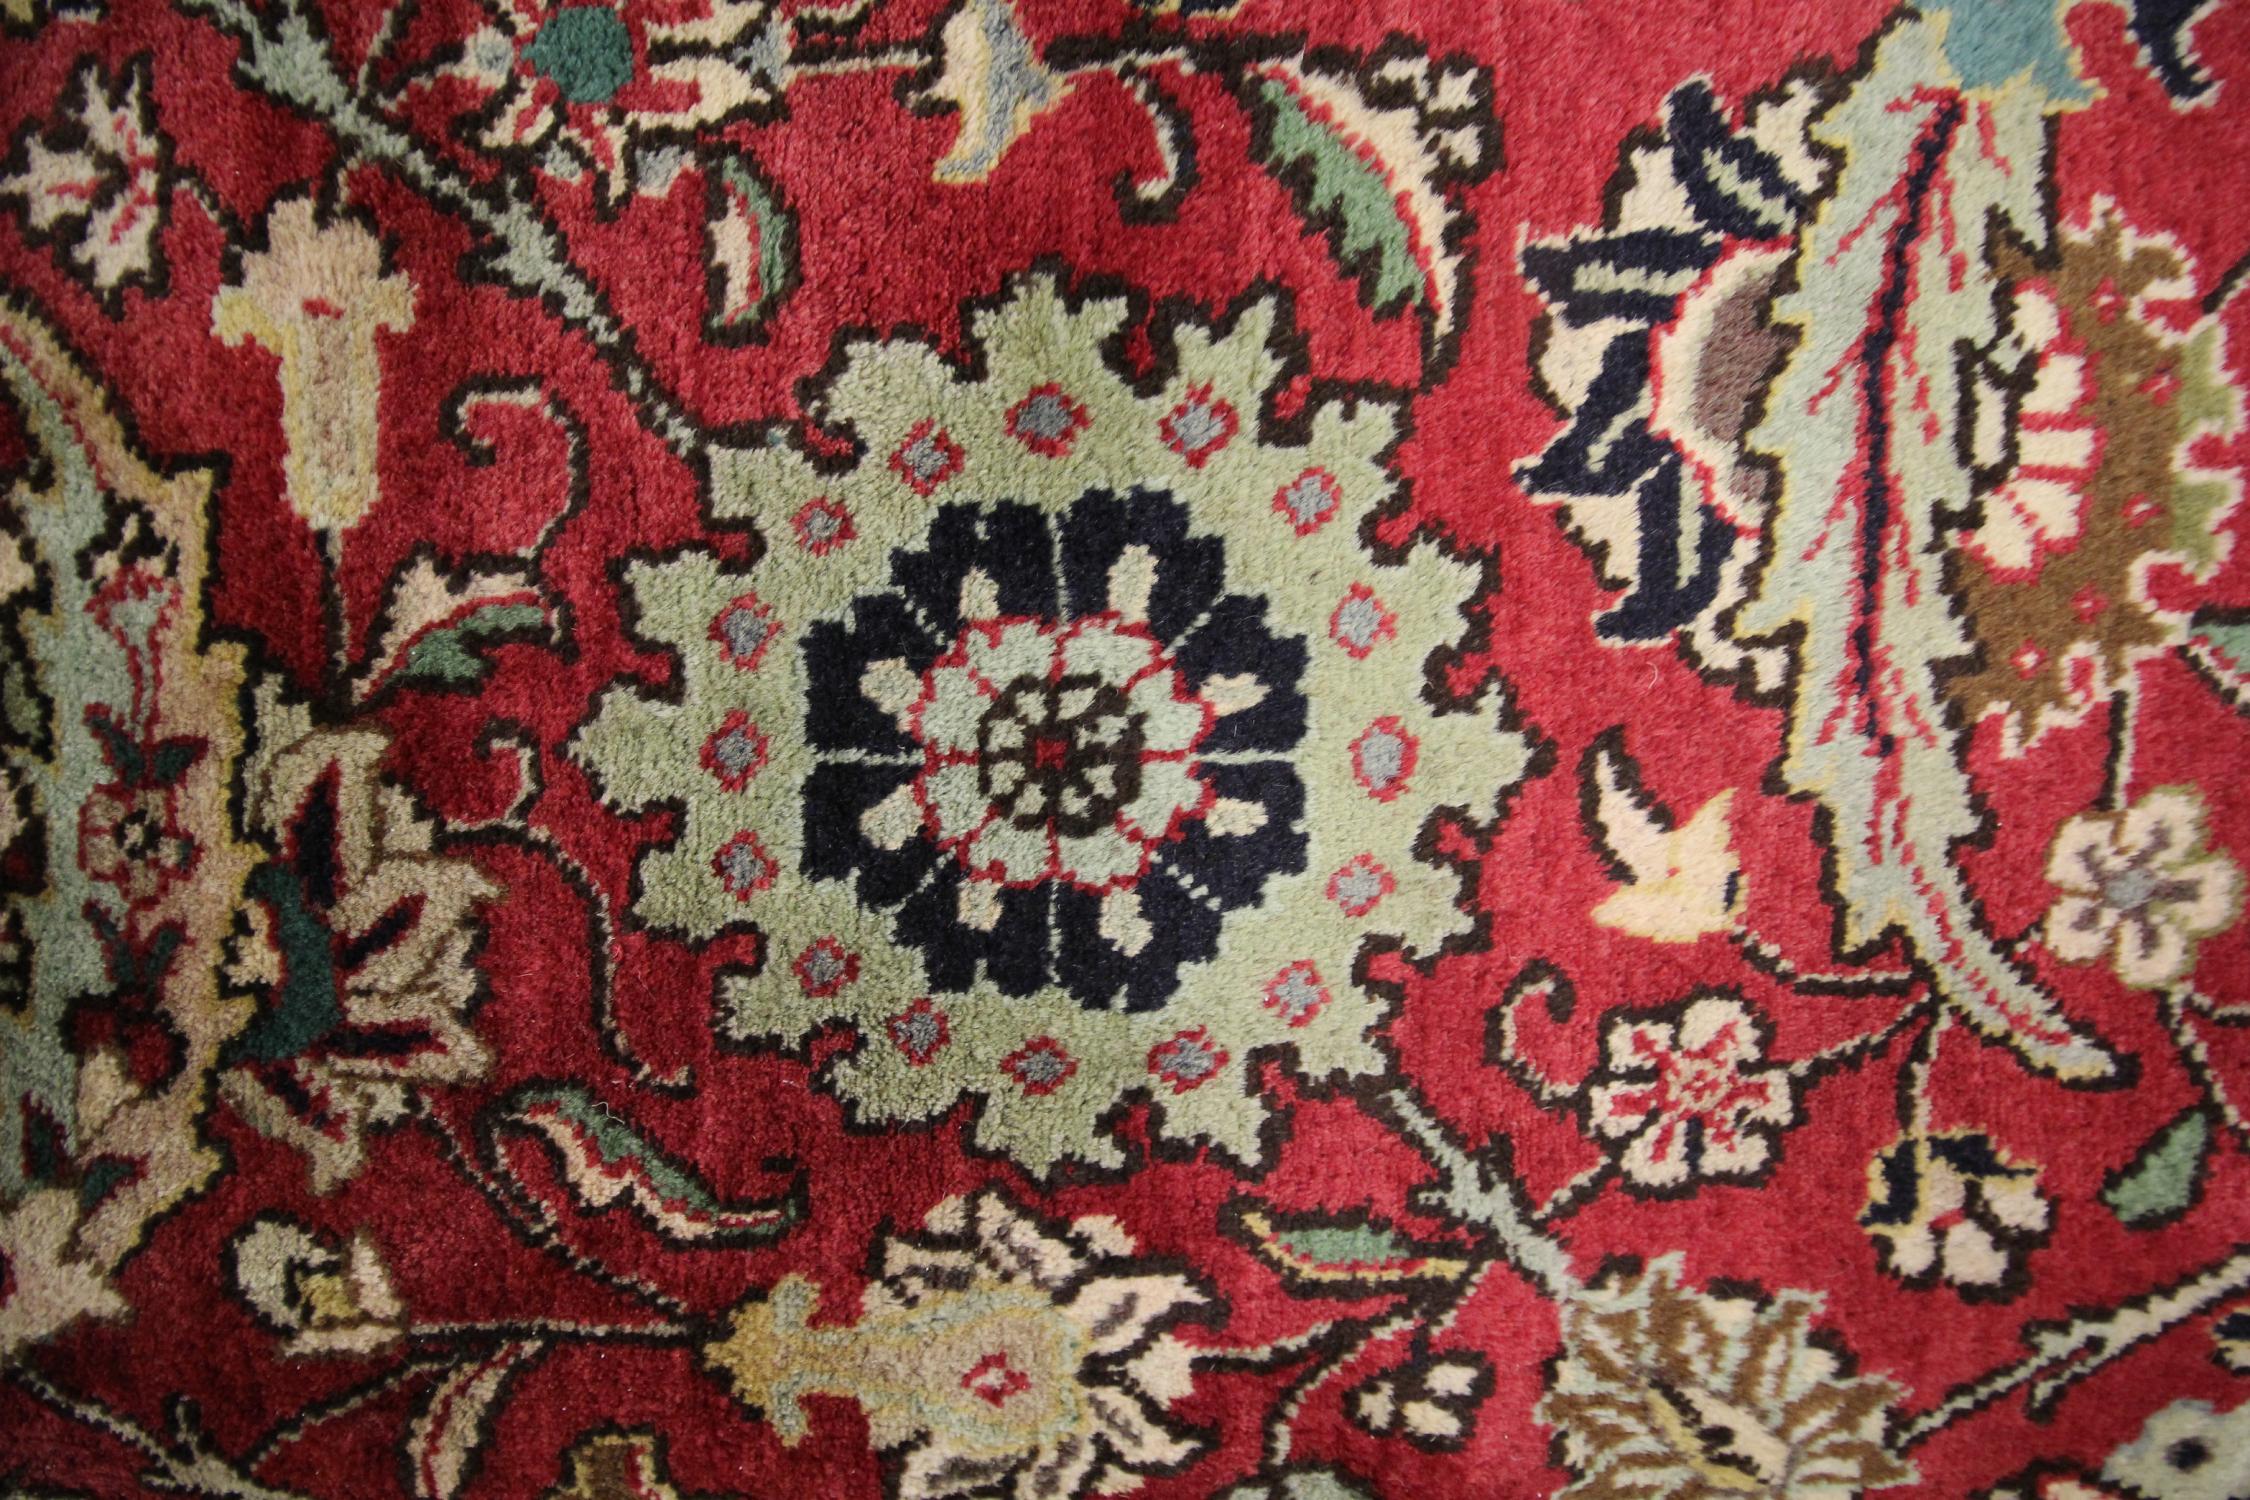 Mid-20th Century Large Vintage Rugs, Red All Over Carpet, Wool Living Room Rugs for Sale For Sale